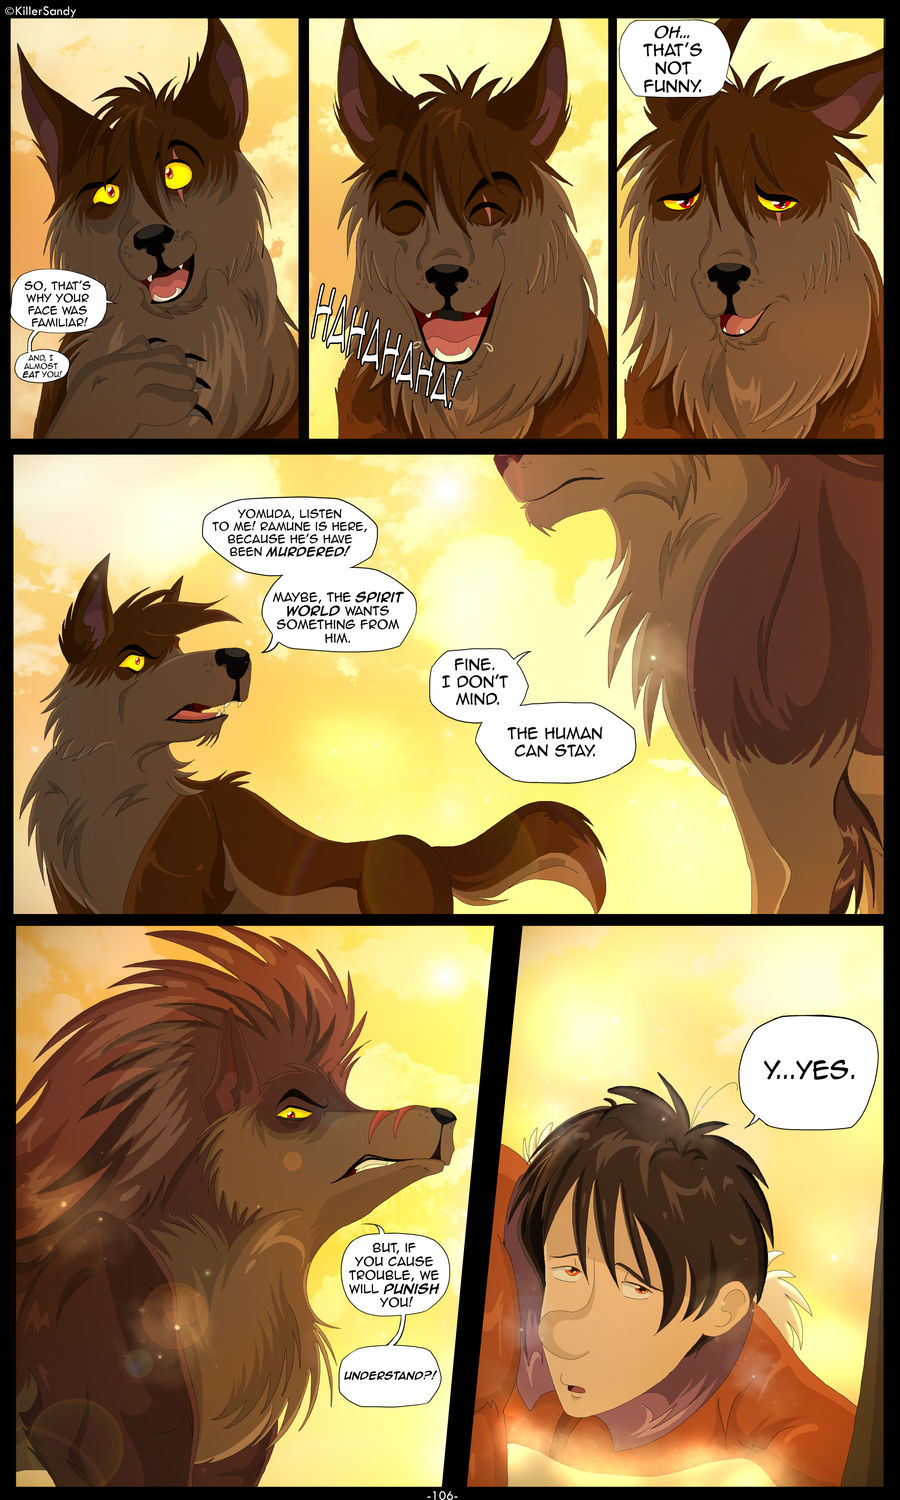 The Prince of the Moonlight Stone page 106